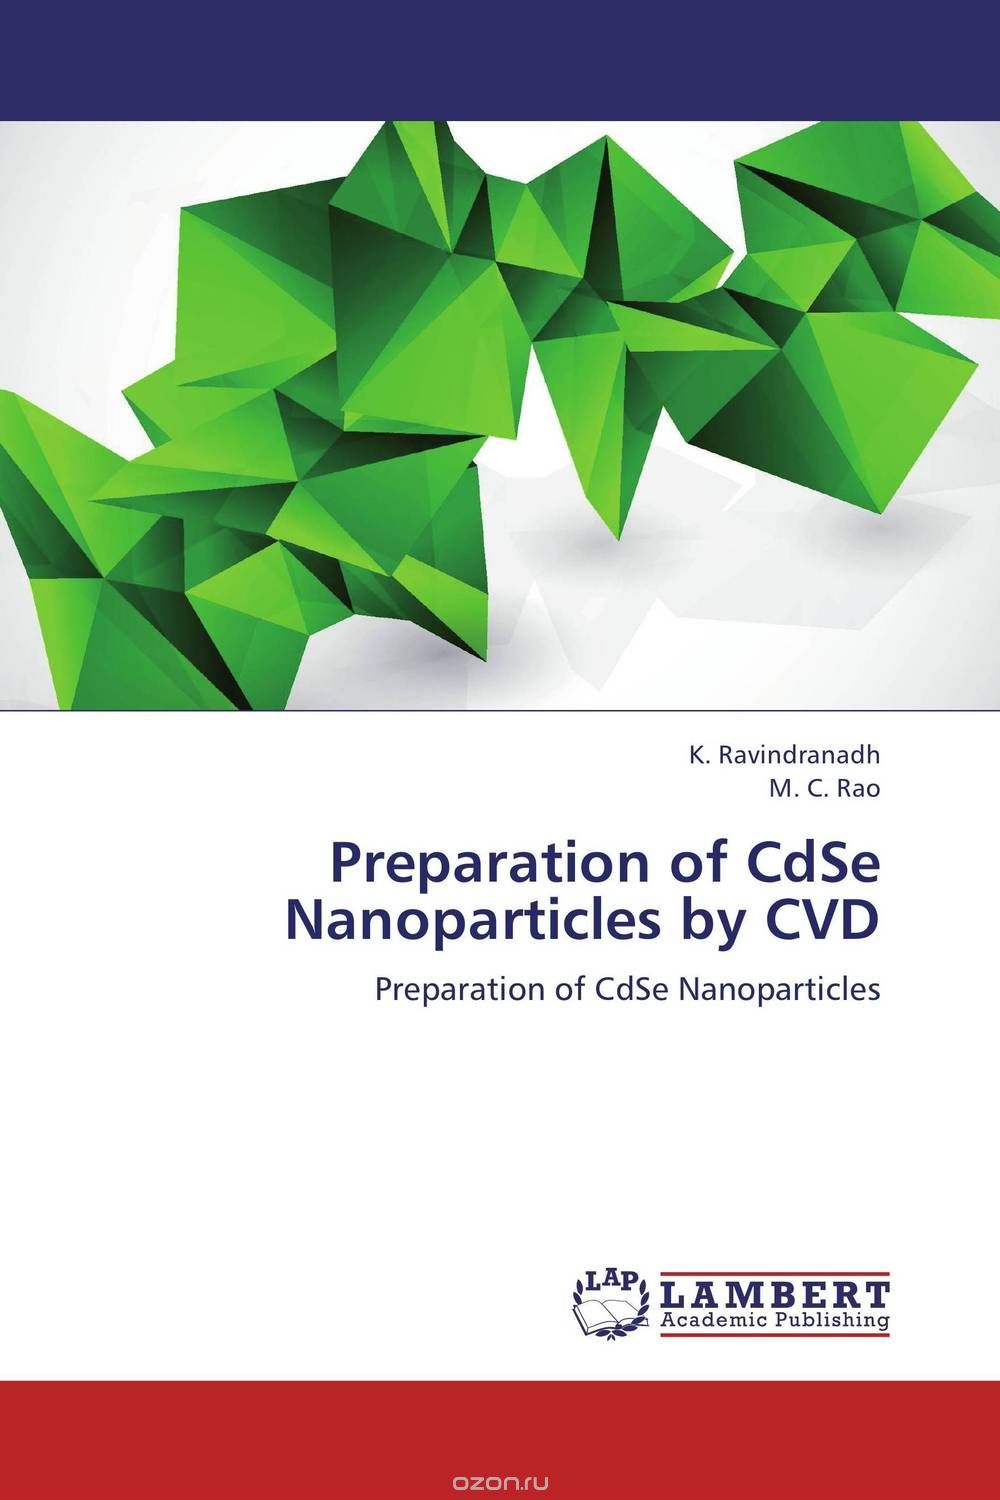 Preparation of CdSe Nanoparticles by CVD